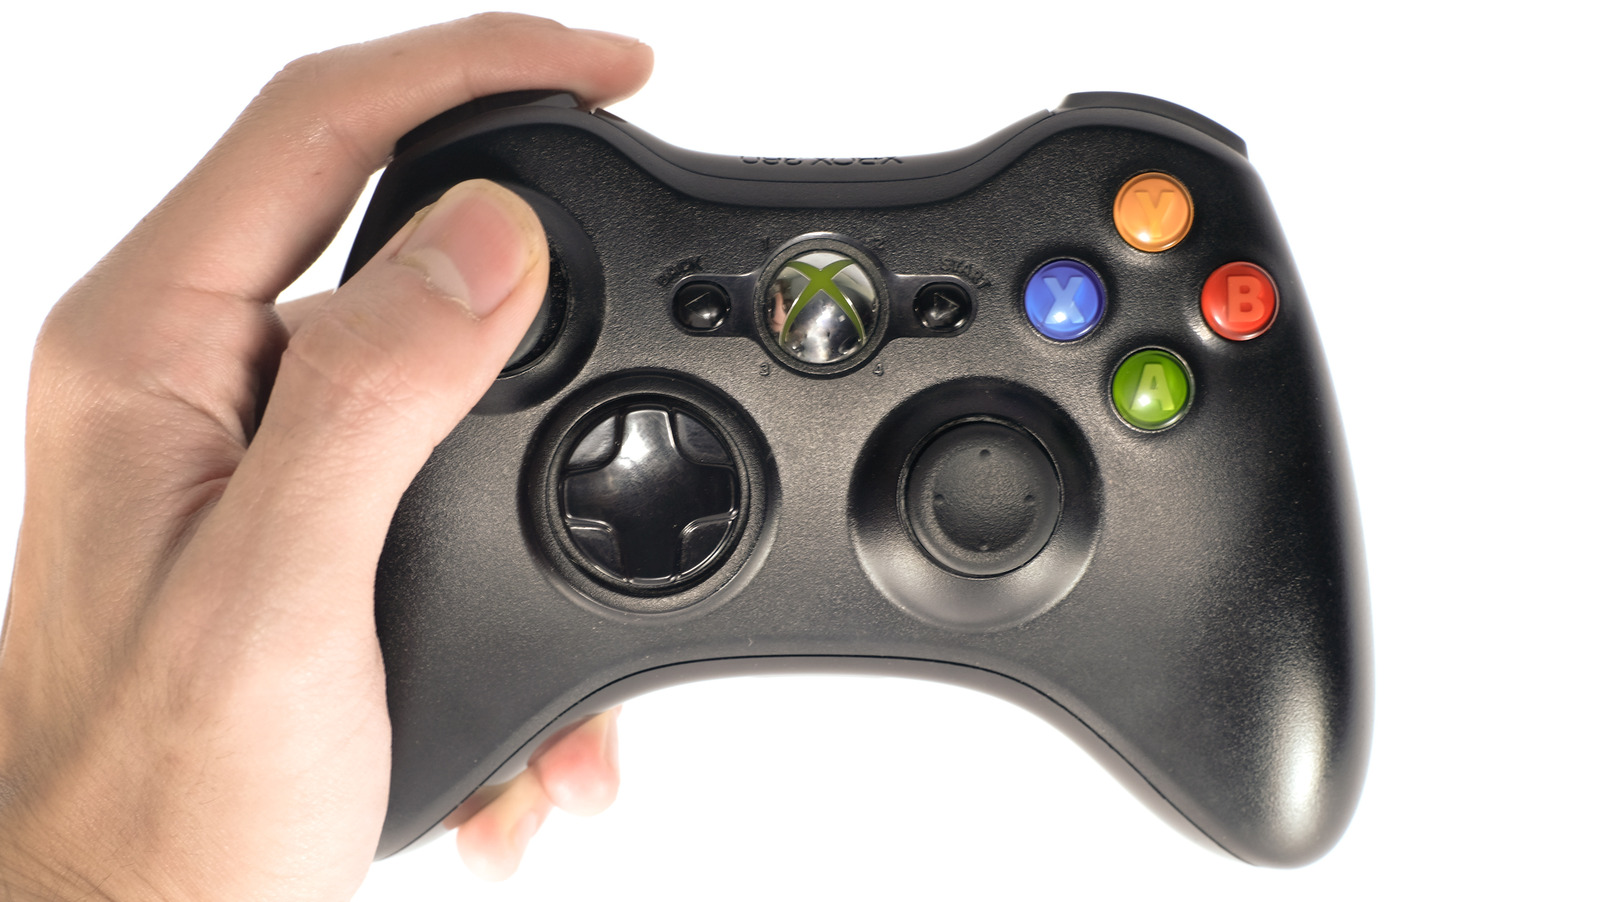 https://www.svg.com/img/gallery/this-beloved-xbox-controller-is-making-a-comeback/l-intro-1669140674.jpg